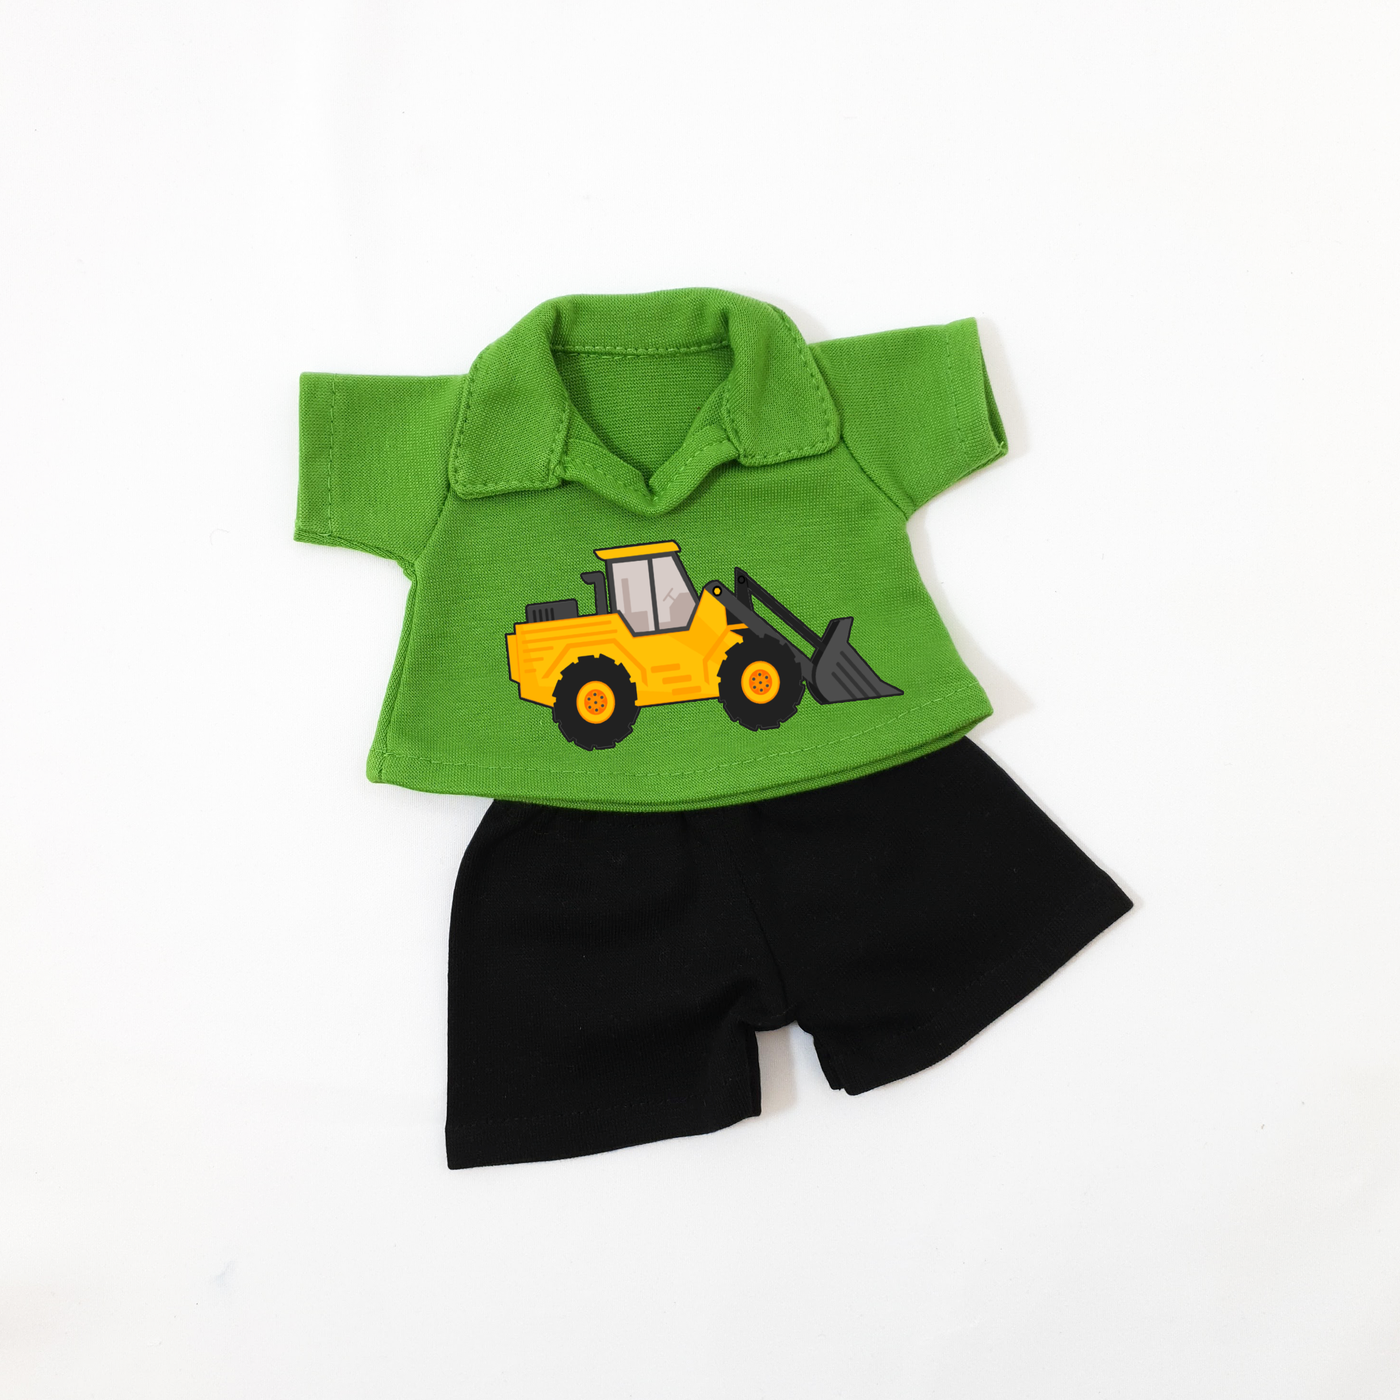 Rag Boy Outfit - Tractor